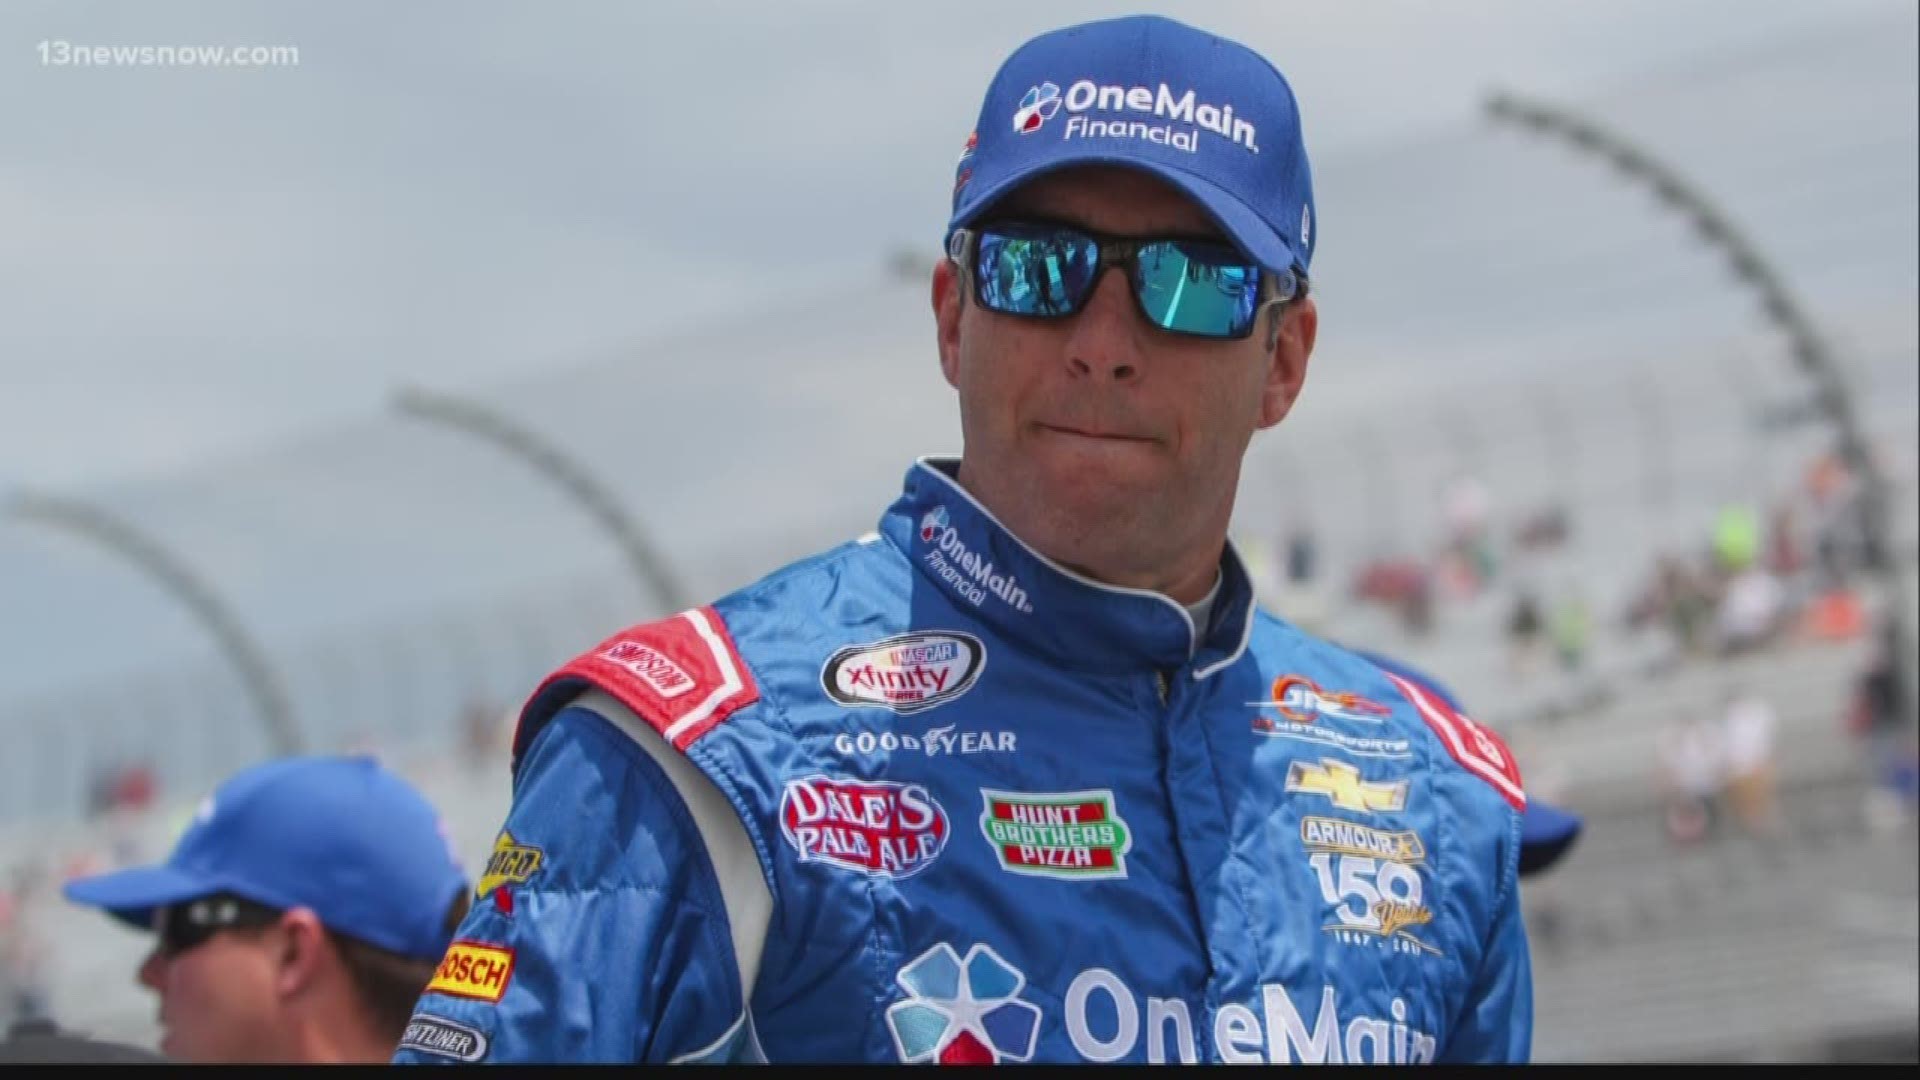 Sadler spent 12 years at the Cup level in NASCAR with 3 wins in that series. Over the last 8 years, he has 13 wins in the Xfinity Series.